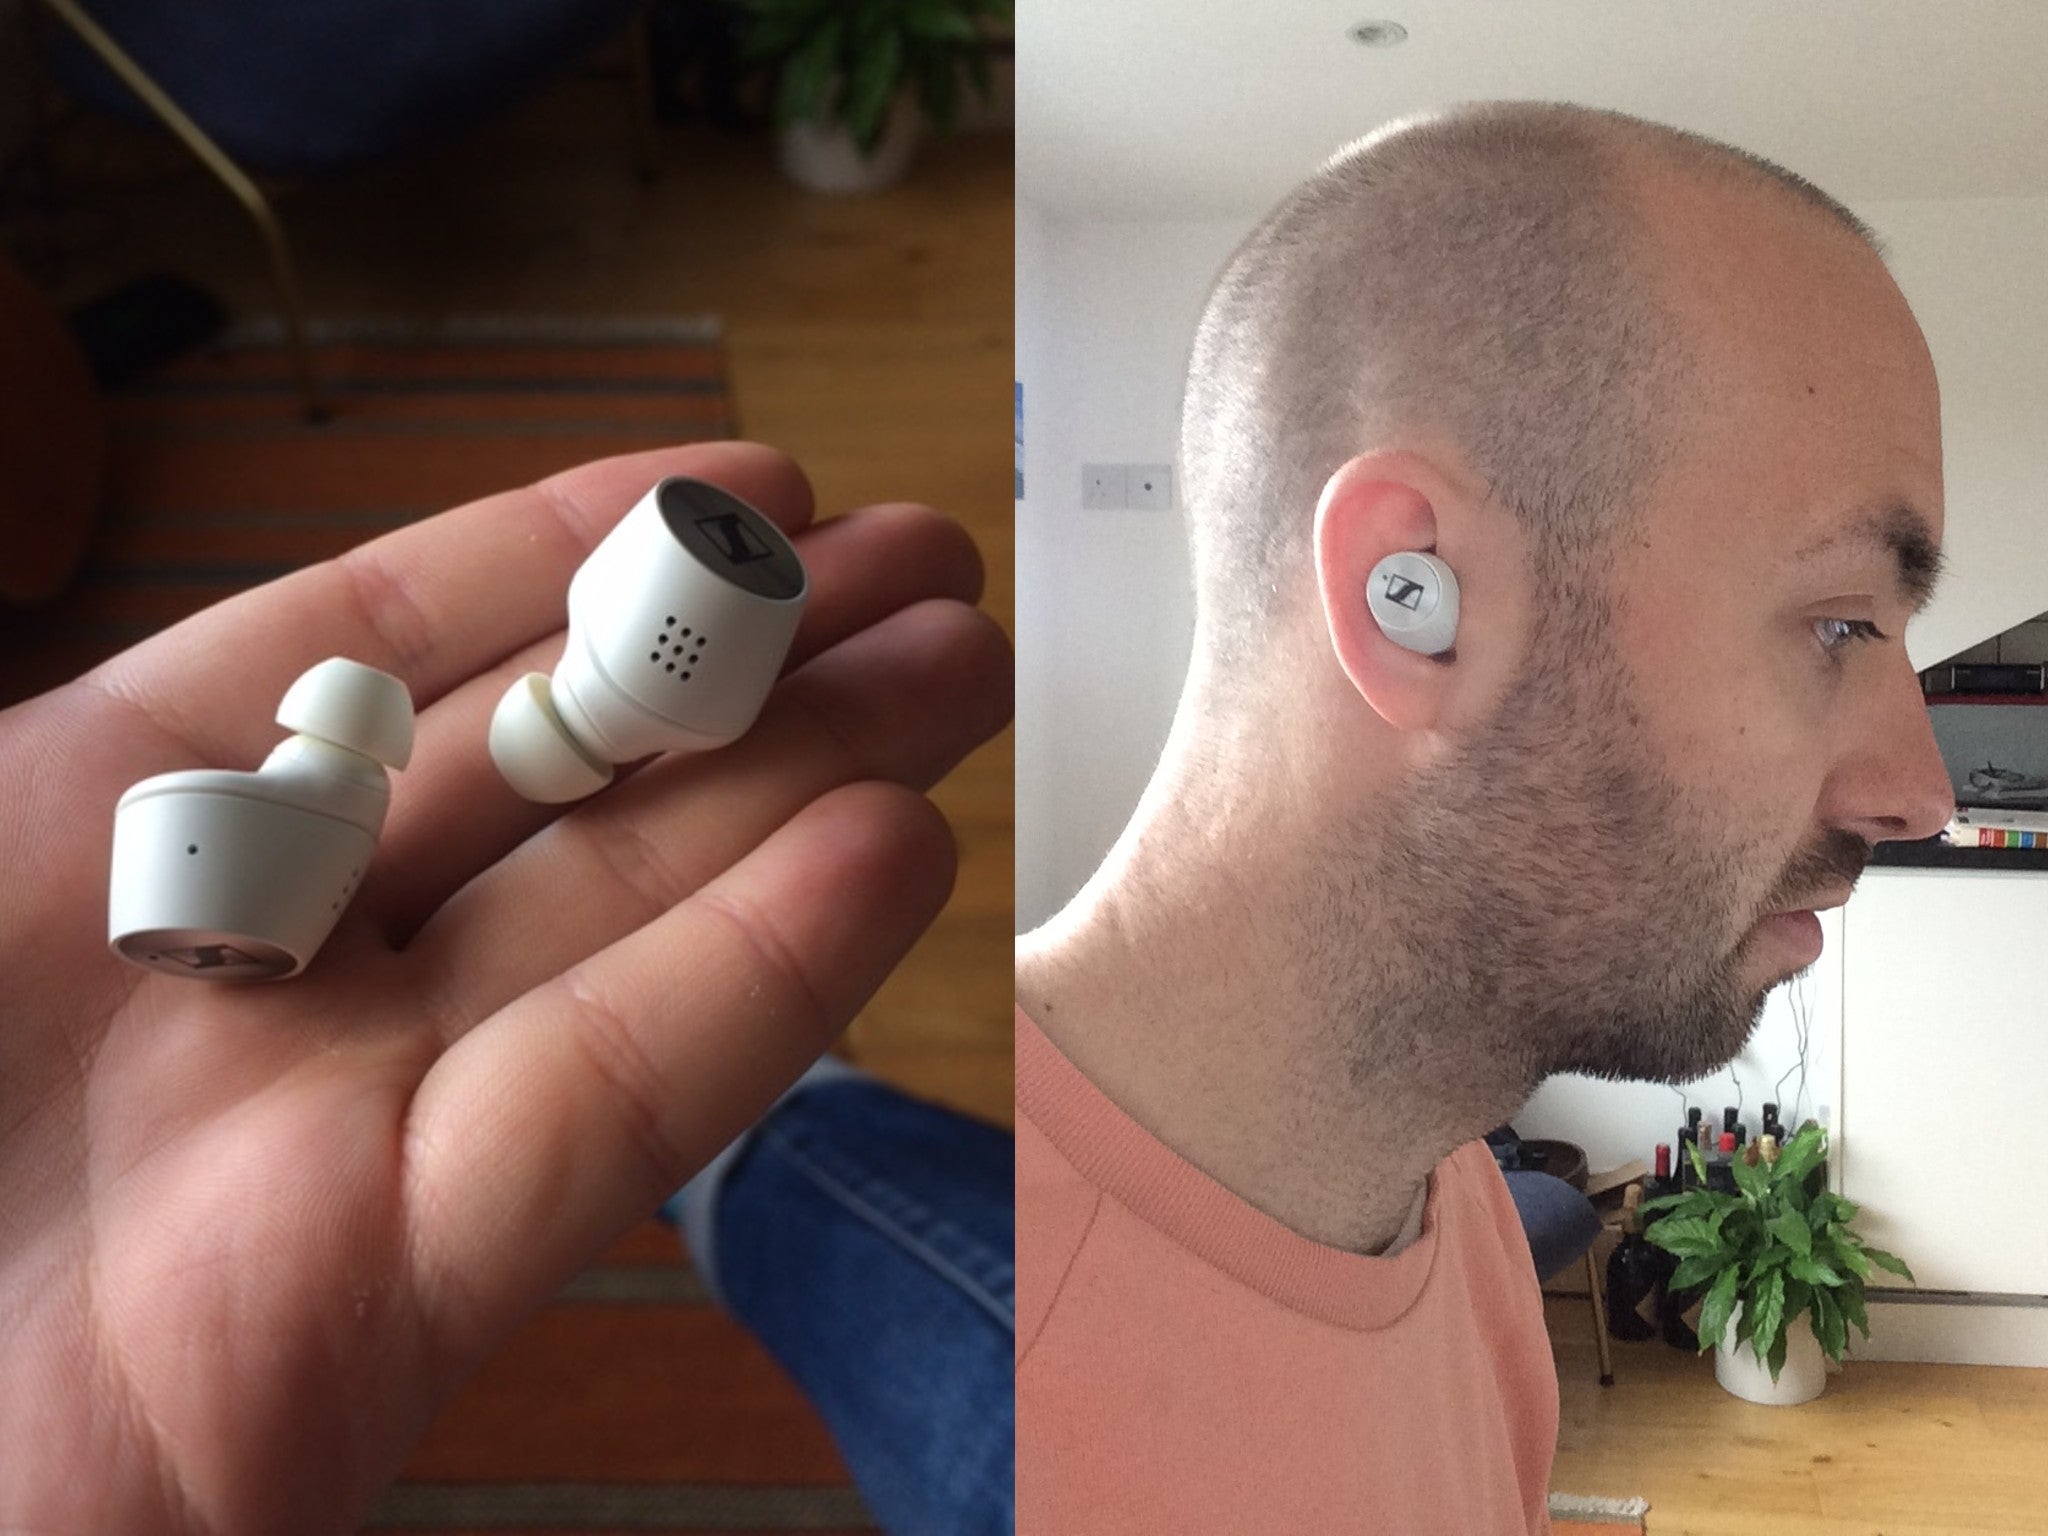 In the time we tested them, the earbuds didn’t drop out once